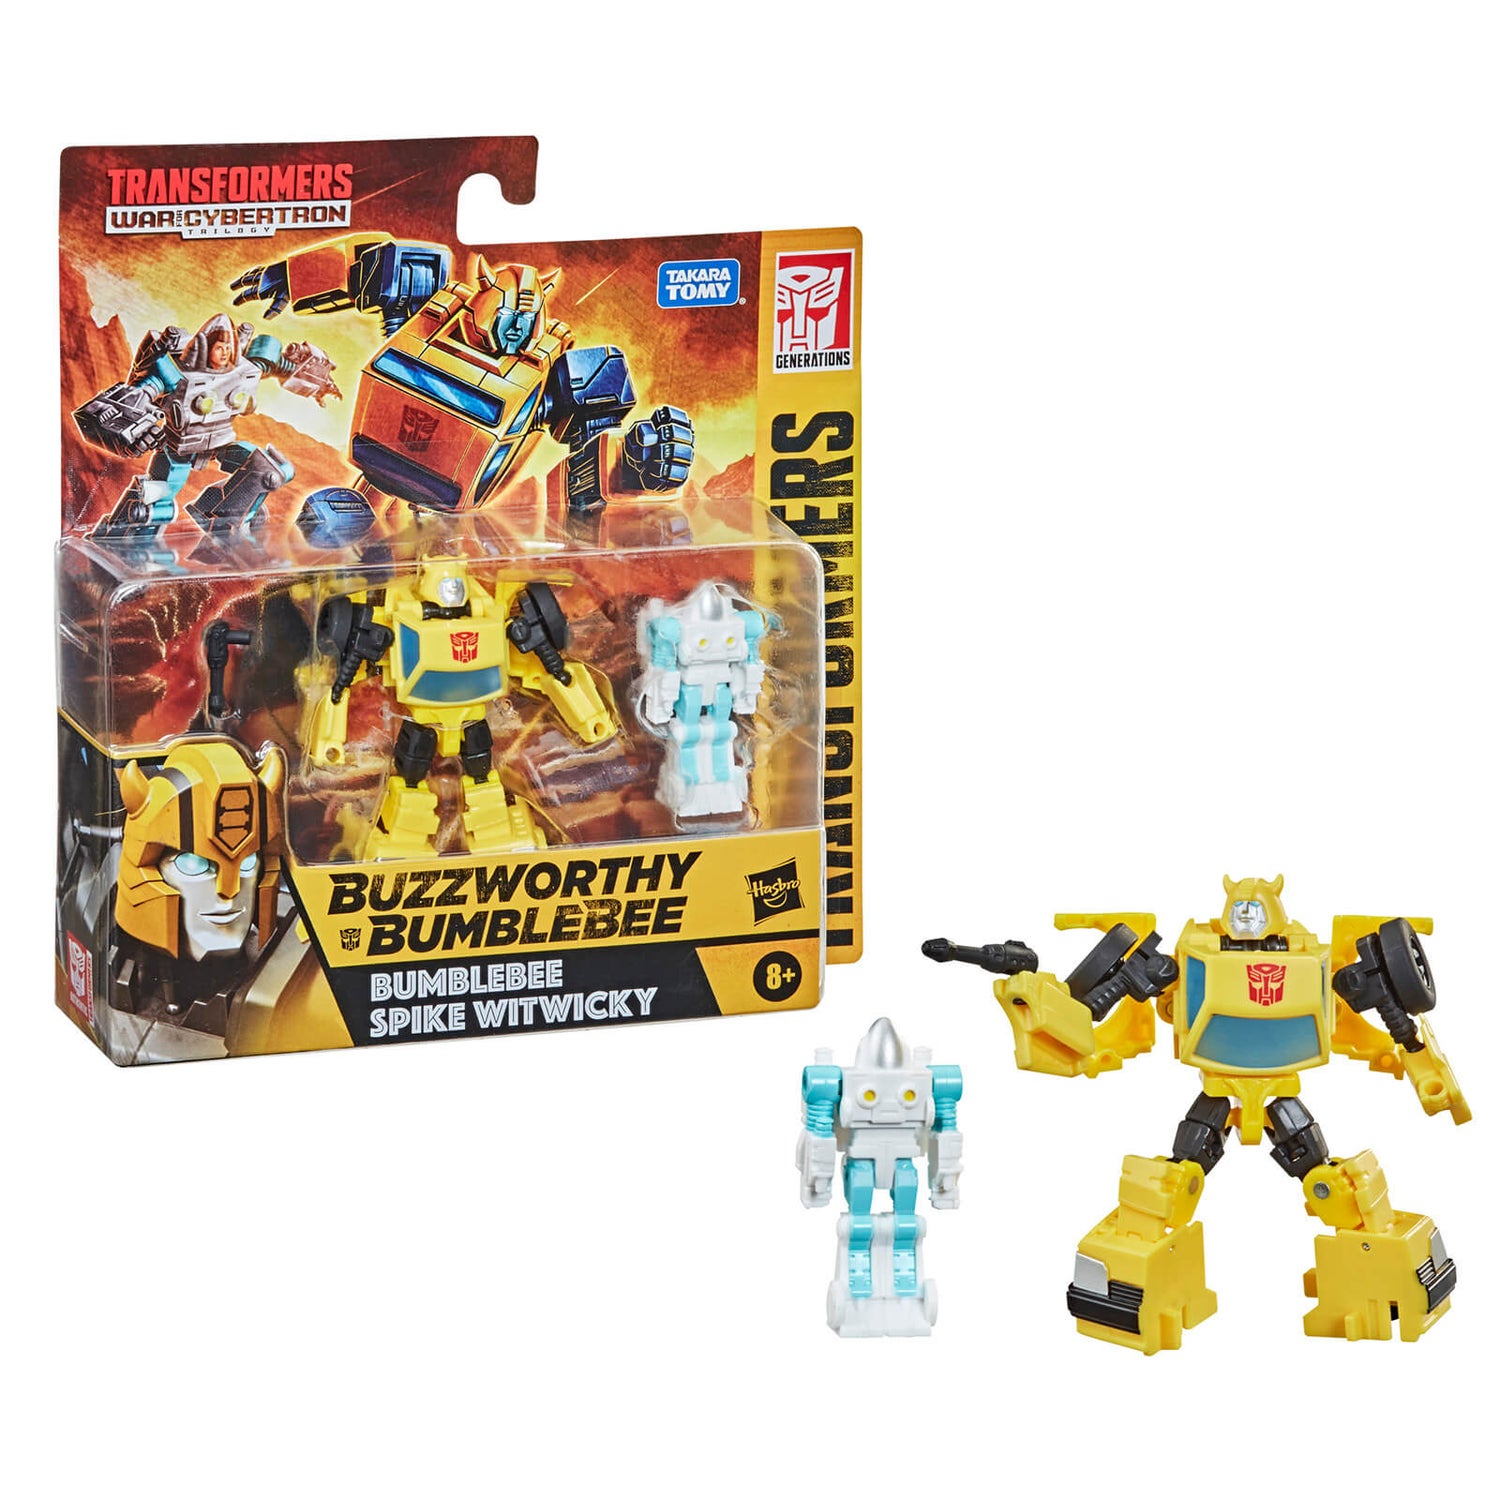 Transformers Buzzworthy Bumblebee War for Cybertron Core Bumblebee & Spike Witwicky 2er-Pack